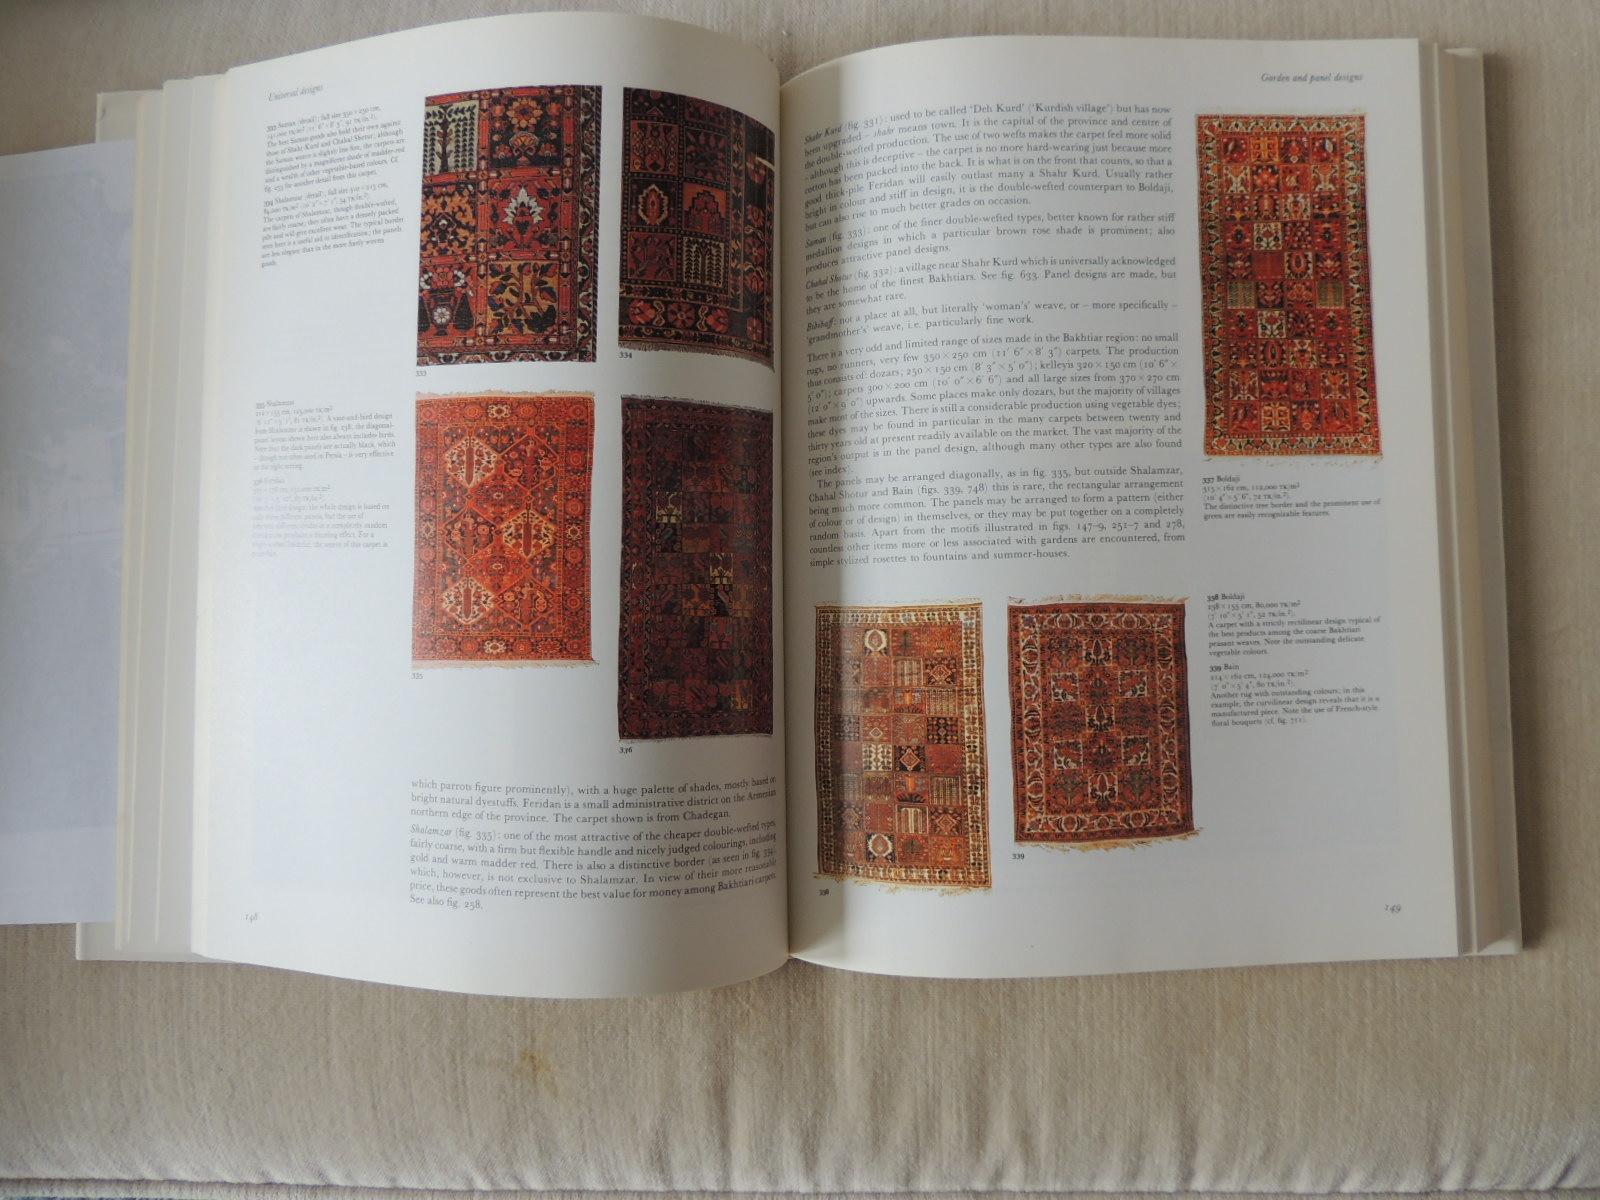 Moorish The Oriental Carpet Hardcover Coffee Table Book by P.R.J. Ford